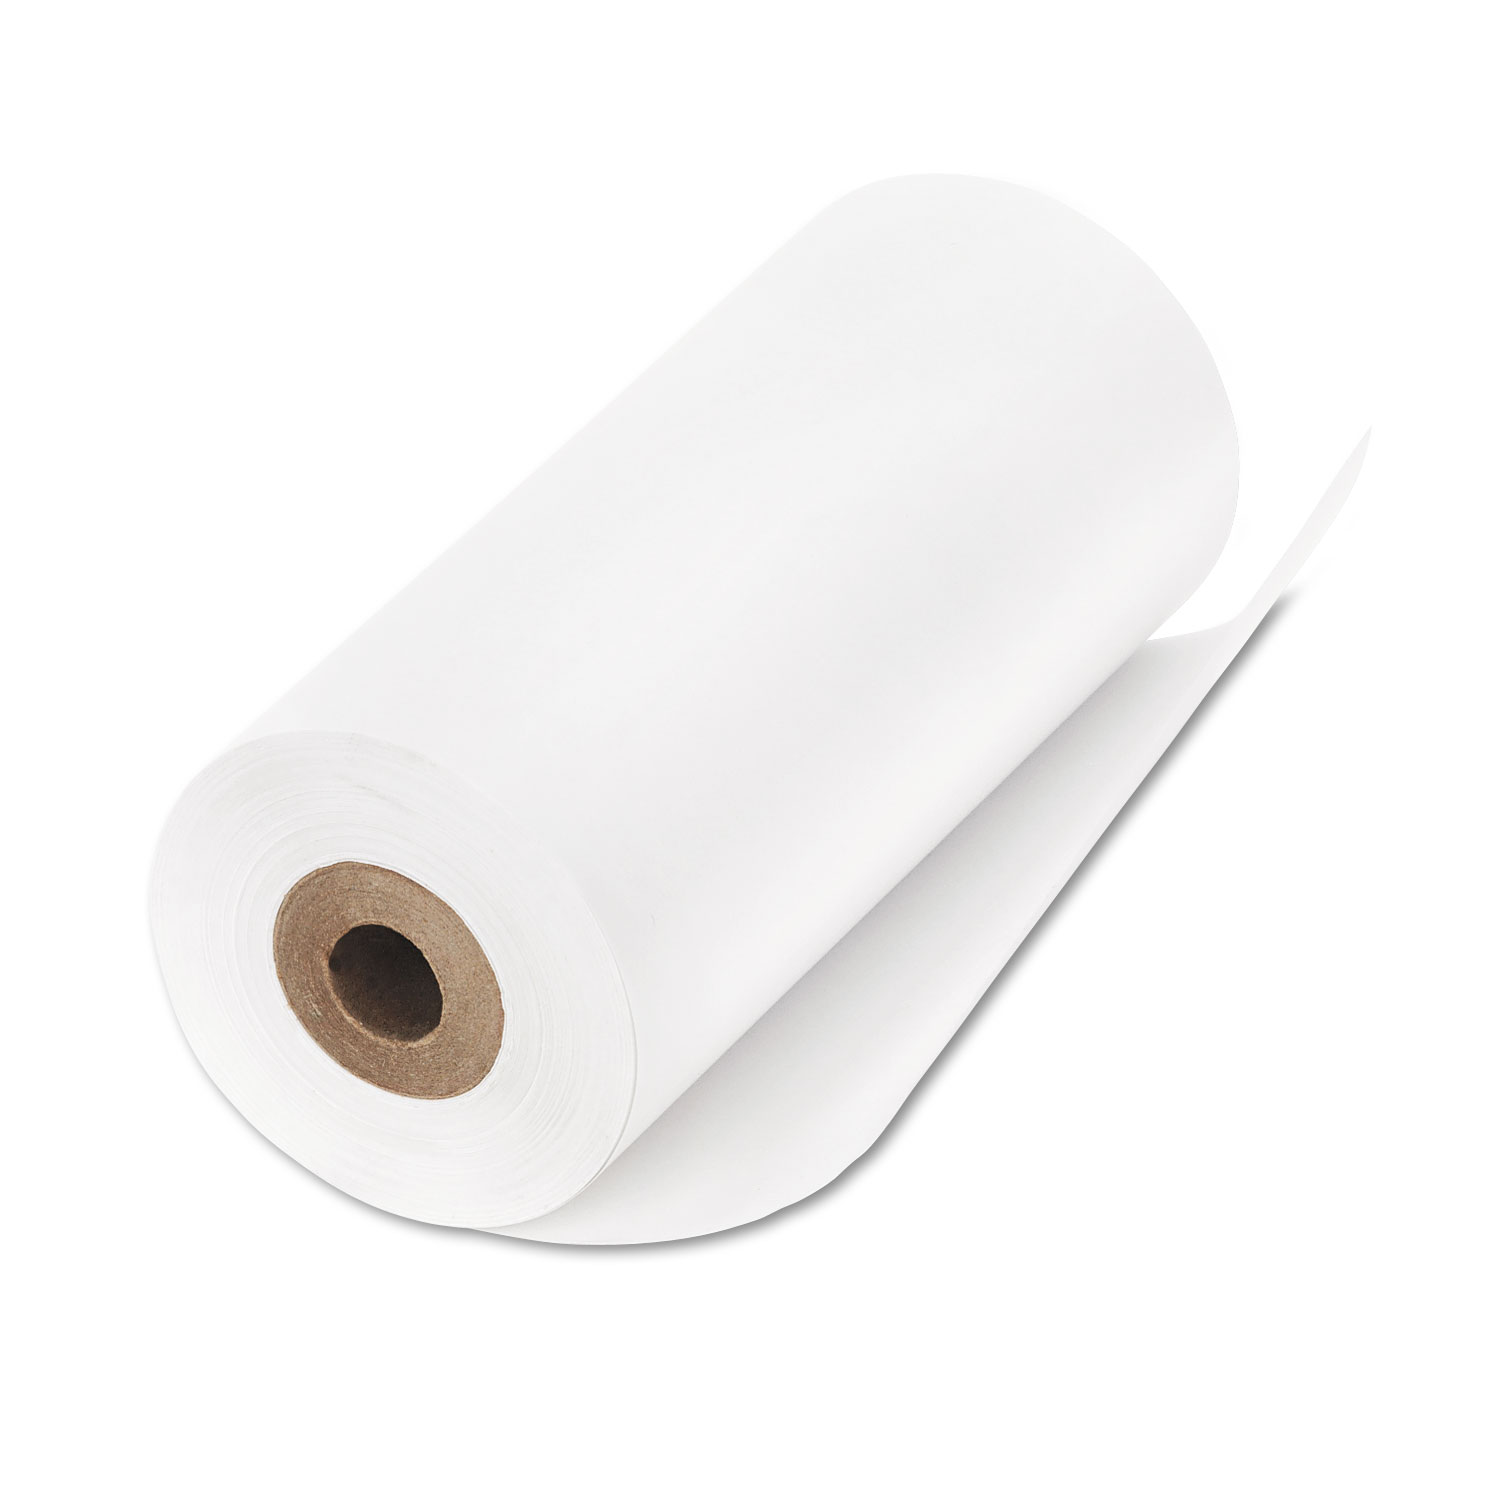 Direct Thermal Printing Thermal Paper Rolls, 4.28 x 78 ft, White